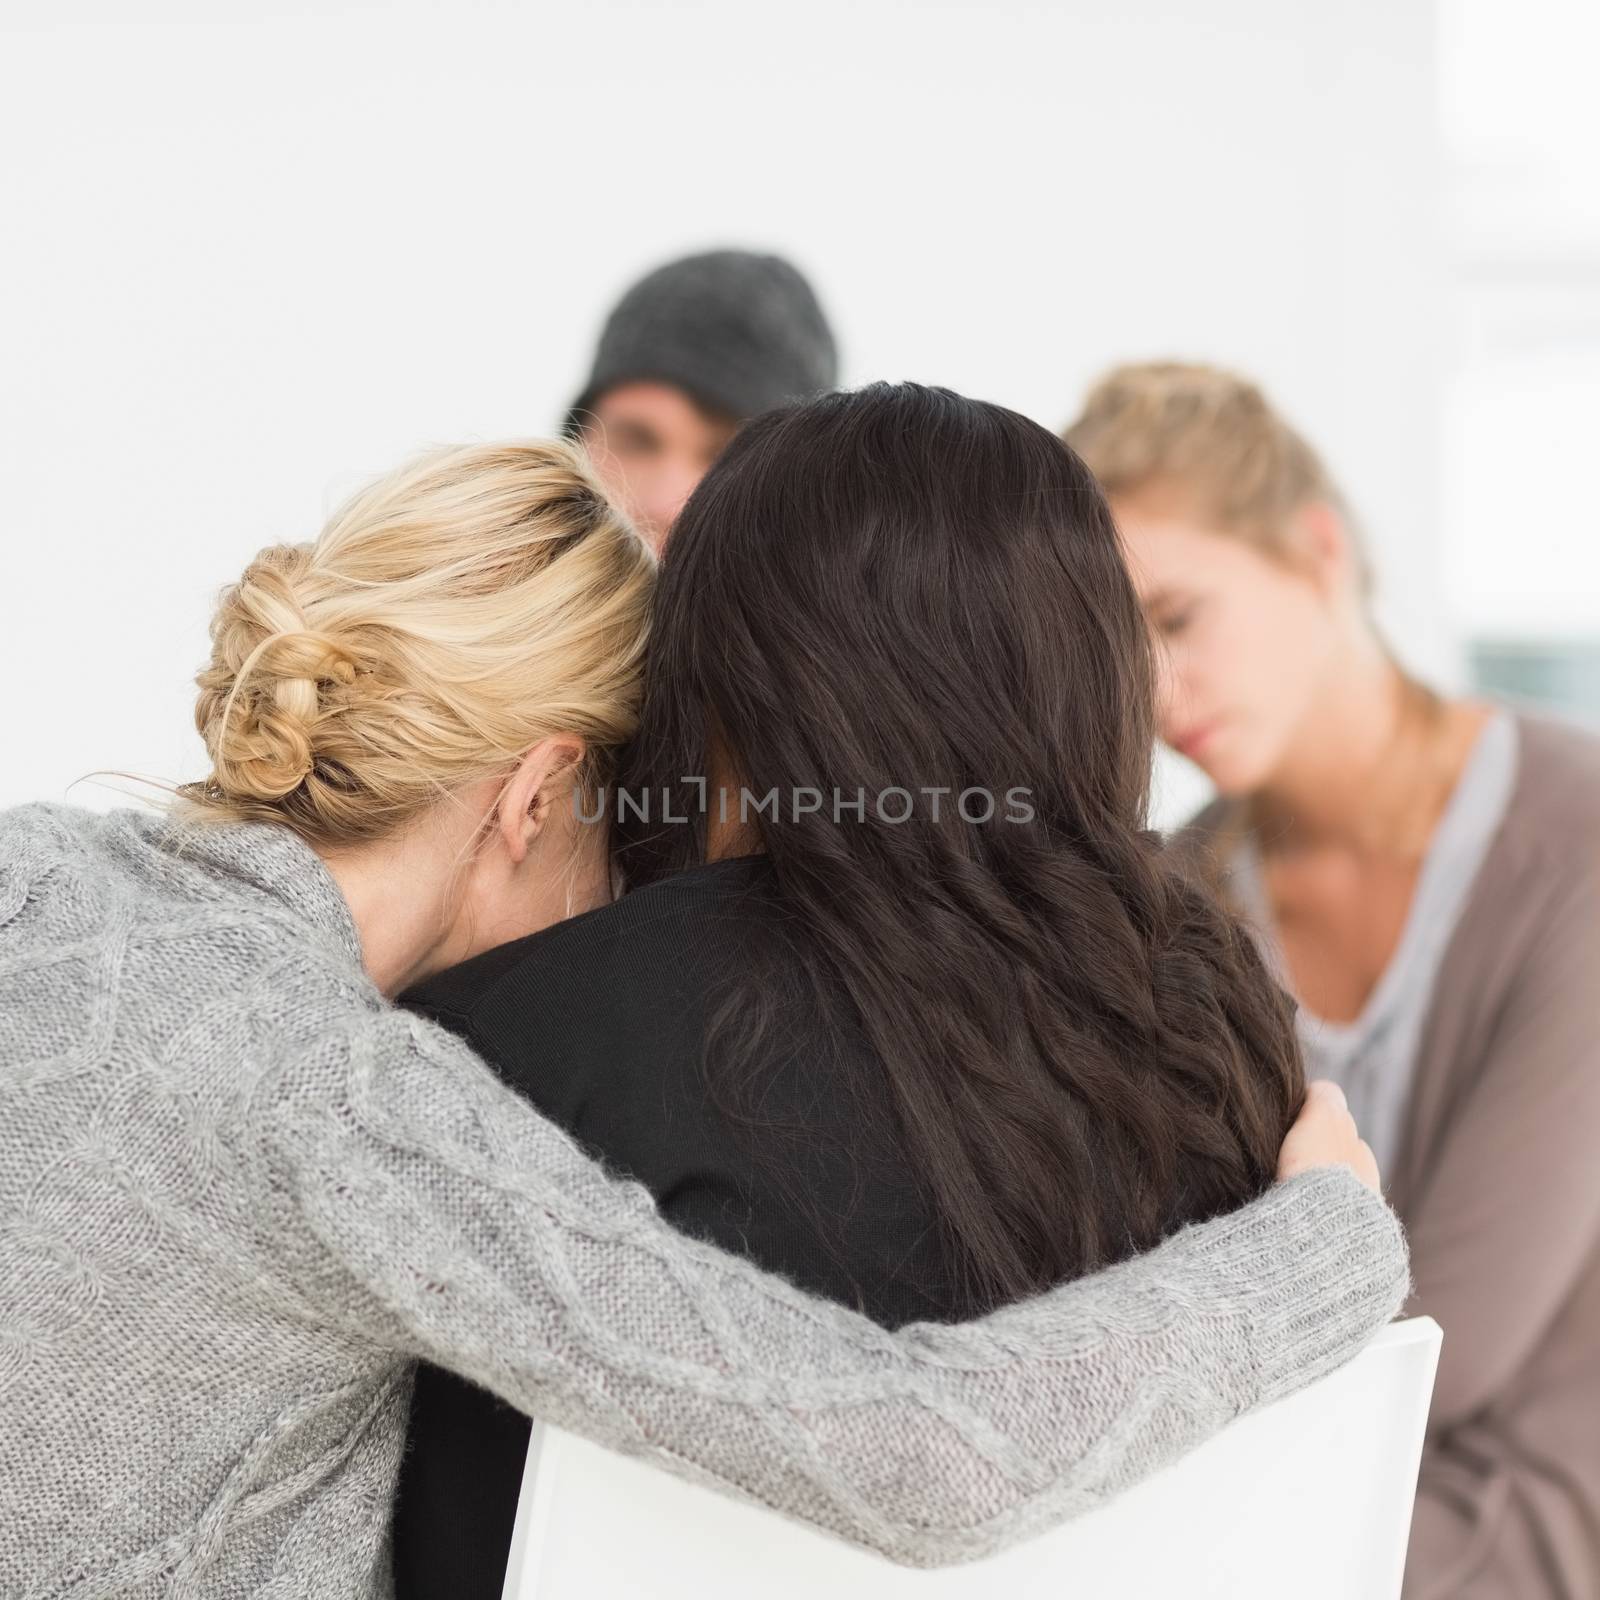 Women hugging in rehab group at therapy session